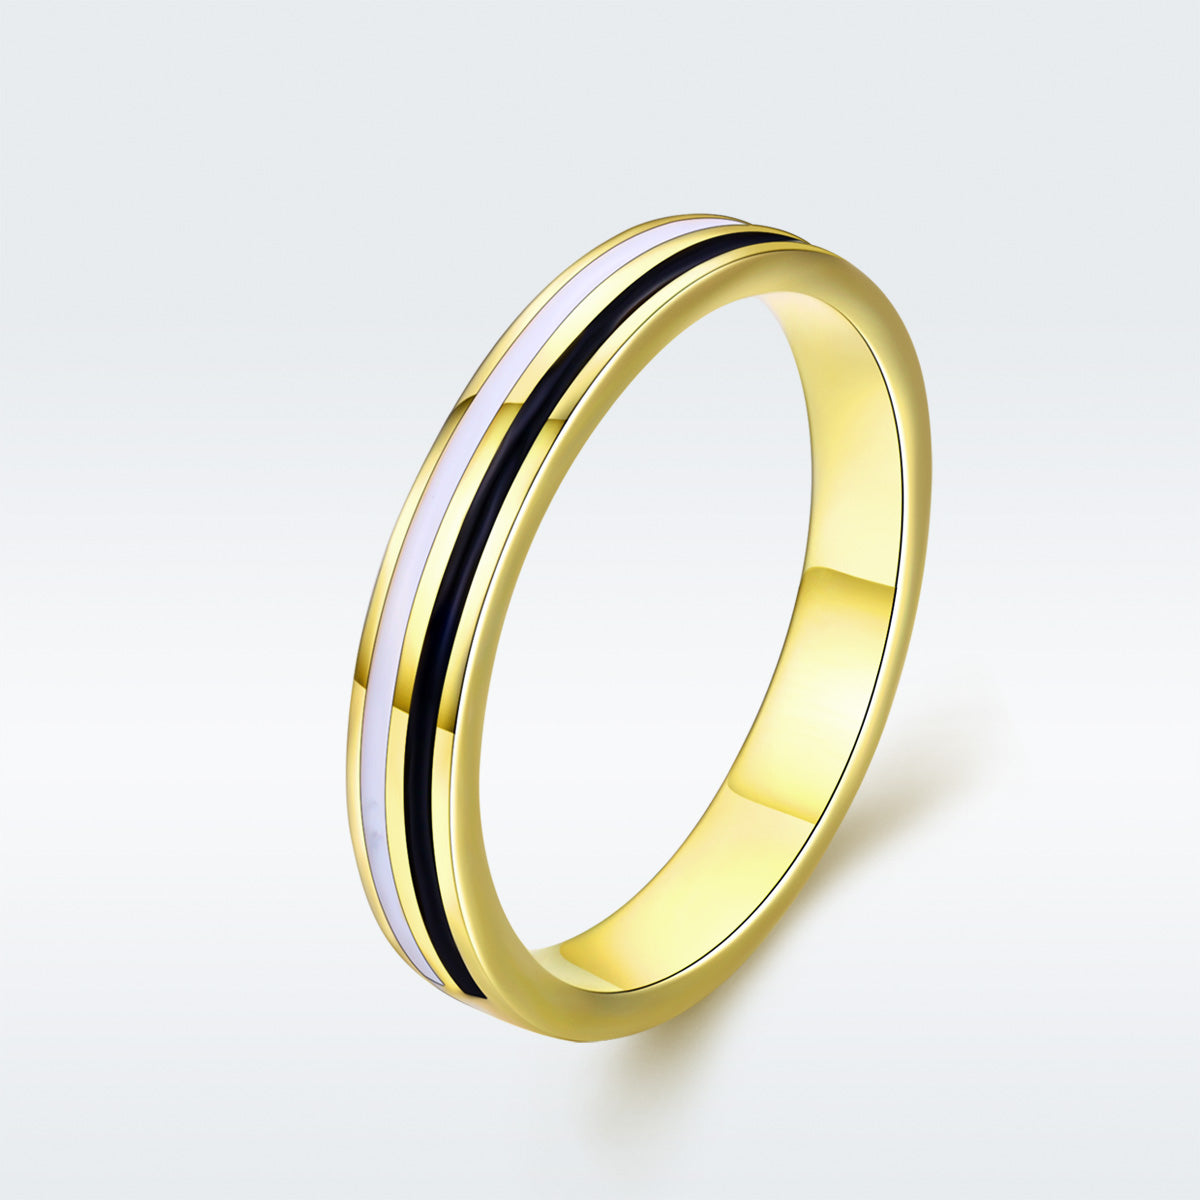 S925 Sterling Silver Fashion Ring Yellow Gold Plated Ring